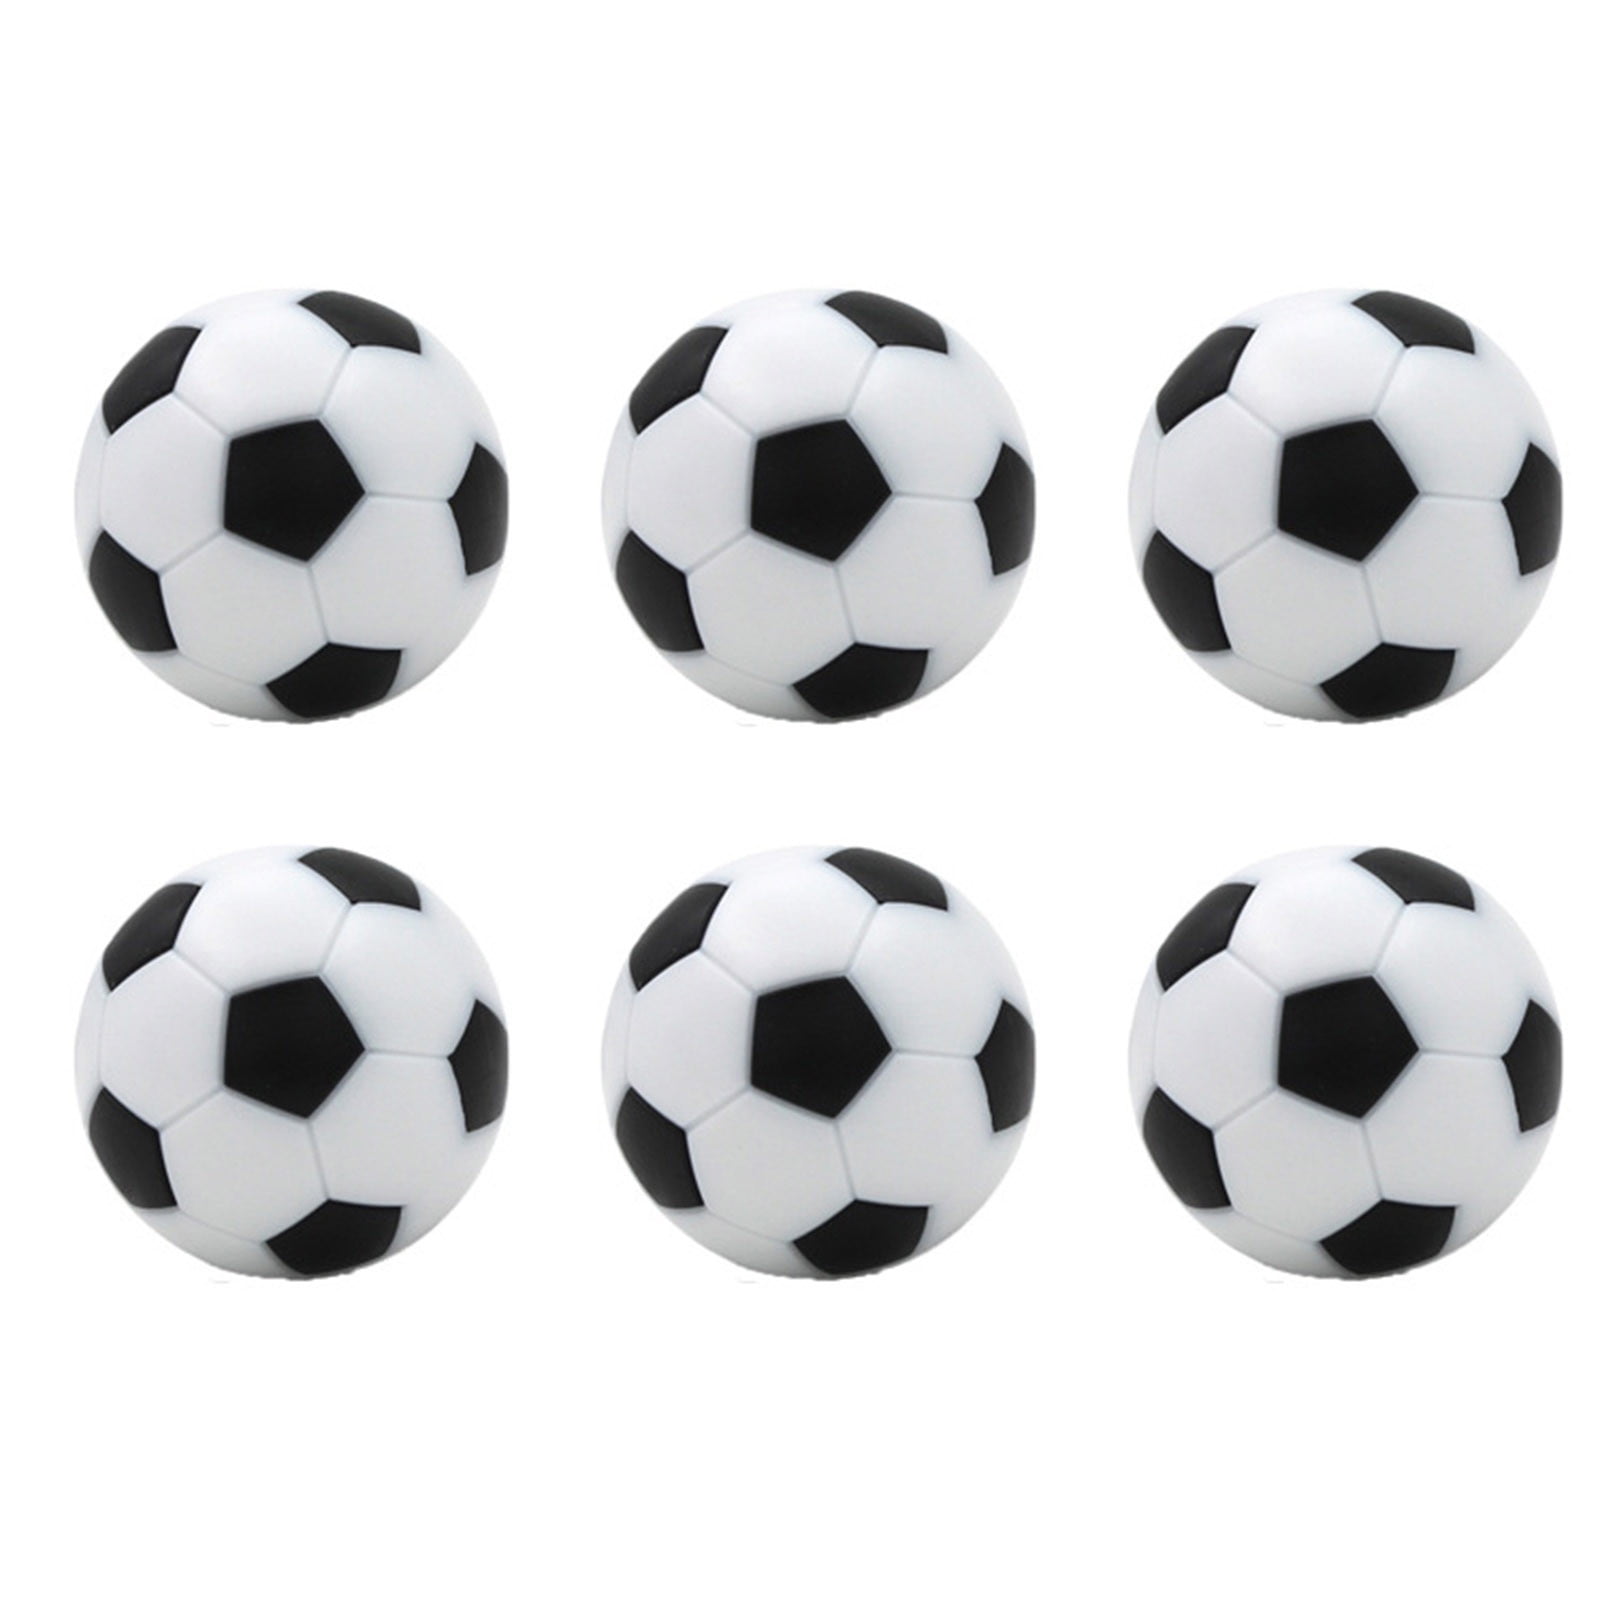 6 Pieces 36mm Soccer Table Football Balls Foosball Replacement Table Game Accessories Blue & White 